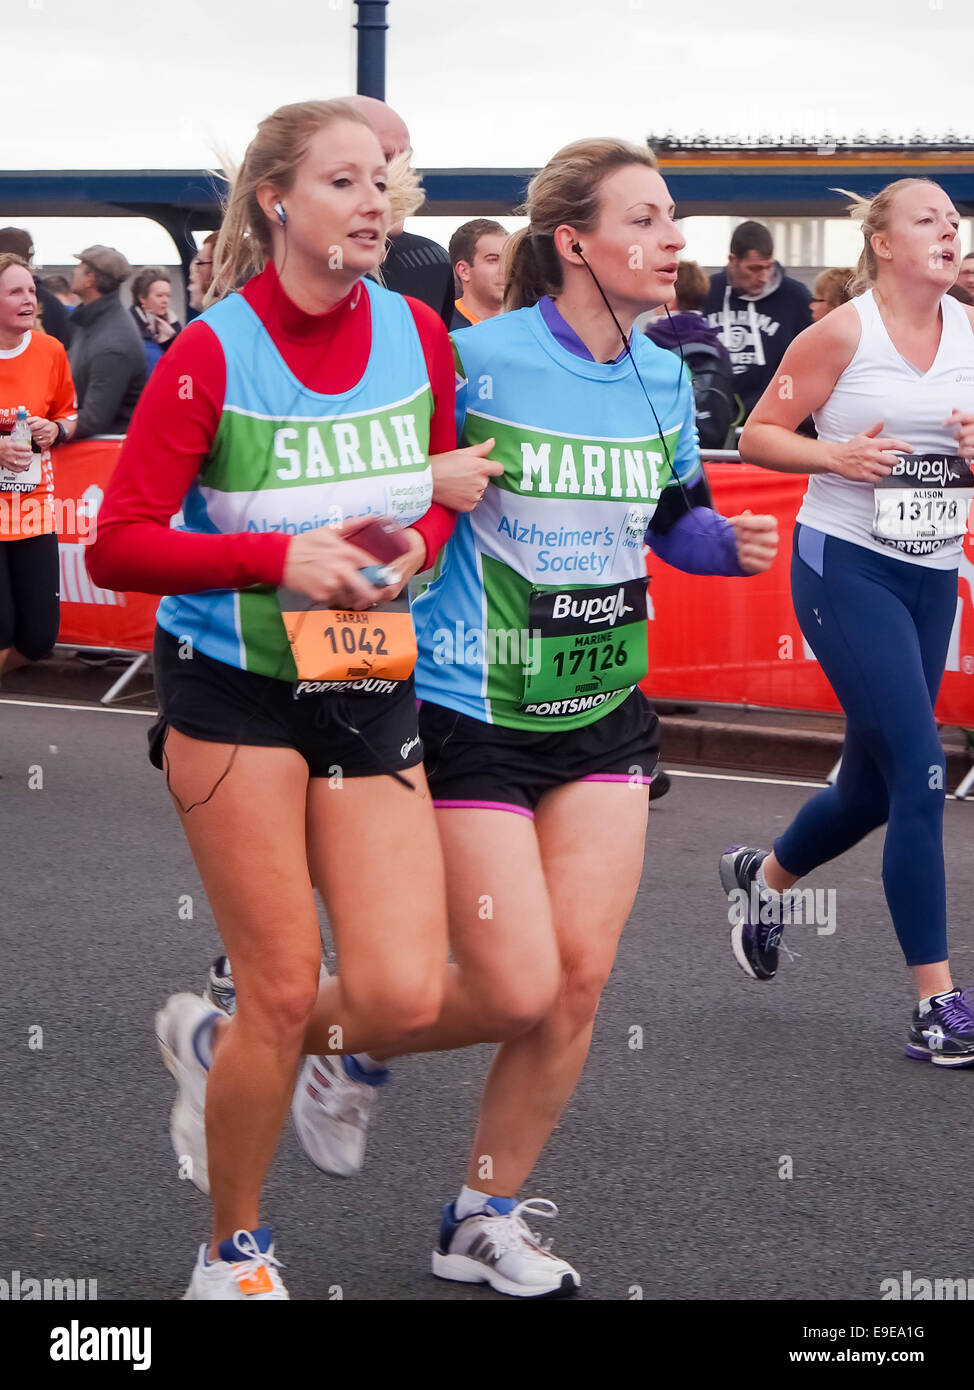 Portsmouth, UK. 26th October 2014. A female runner assists her friend across the finishing line as 25000 runners take part in the Great South run. The run consists of  a 10 mile road race through the streets of Portsmouth. Credit:  simon evans/Alamy Live News Stock Photo